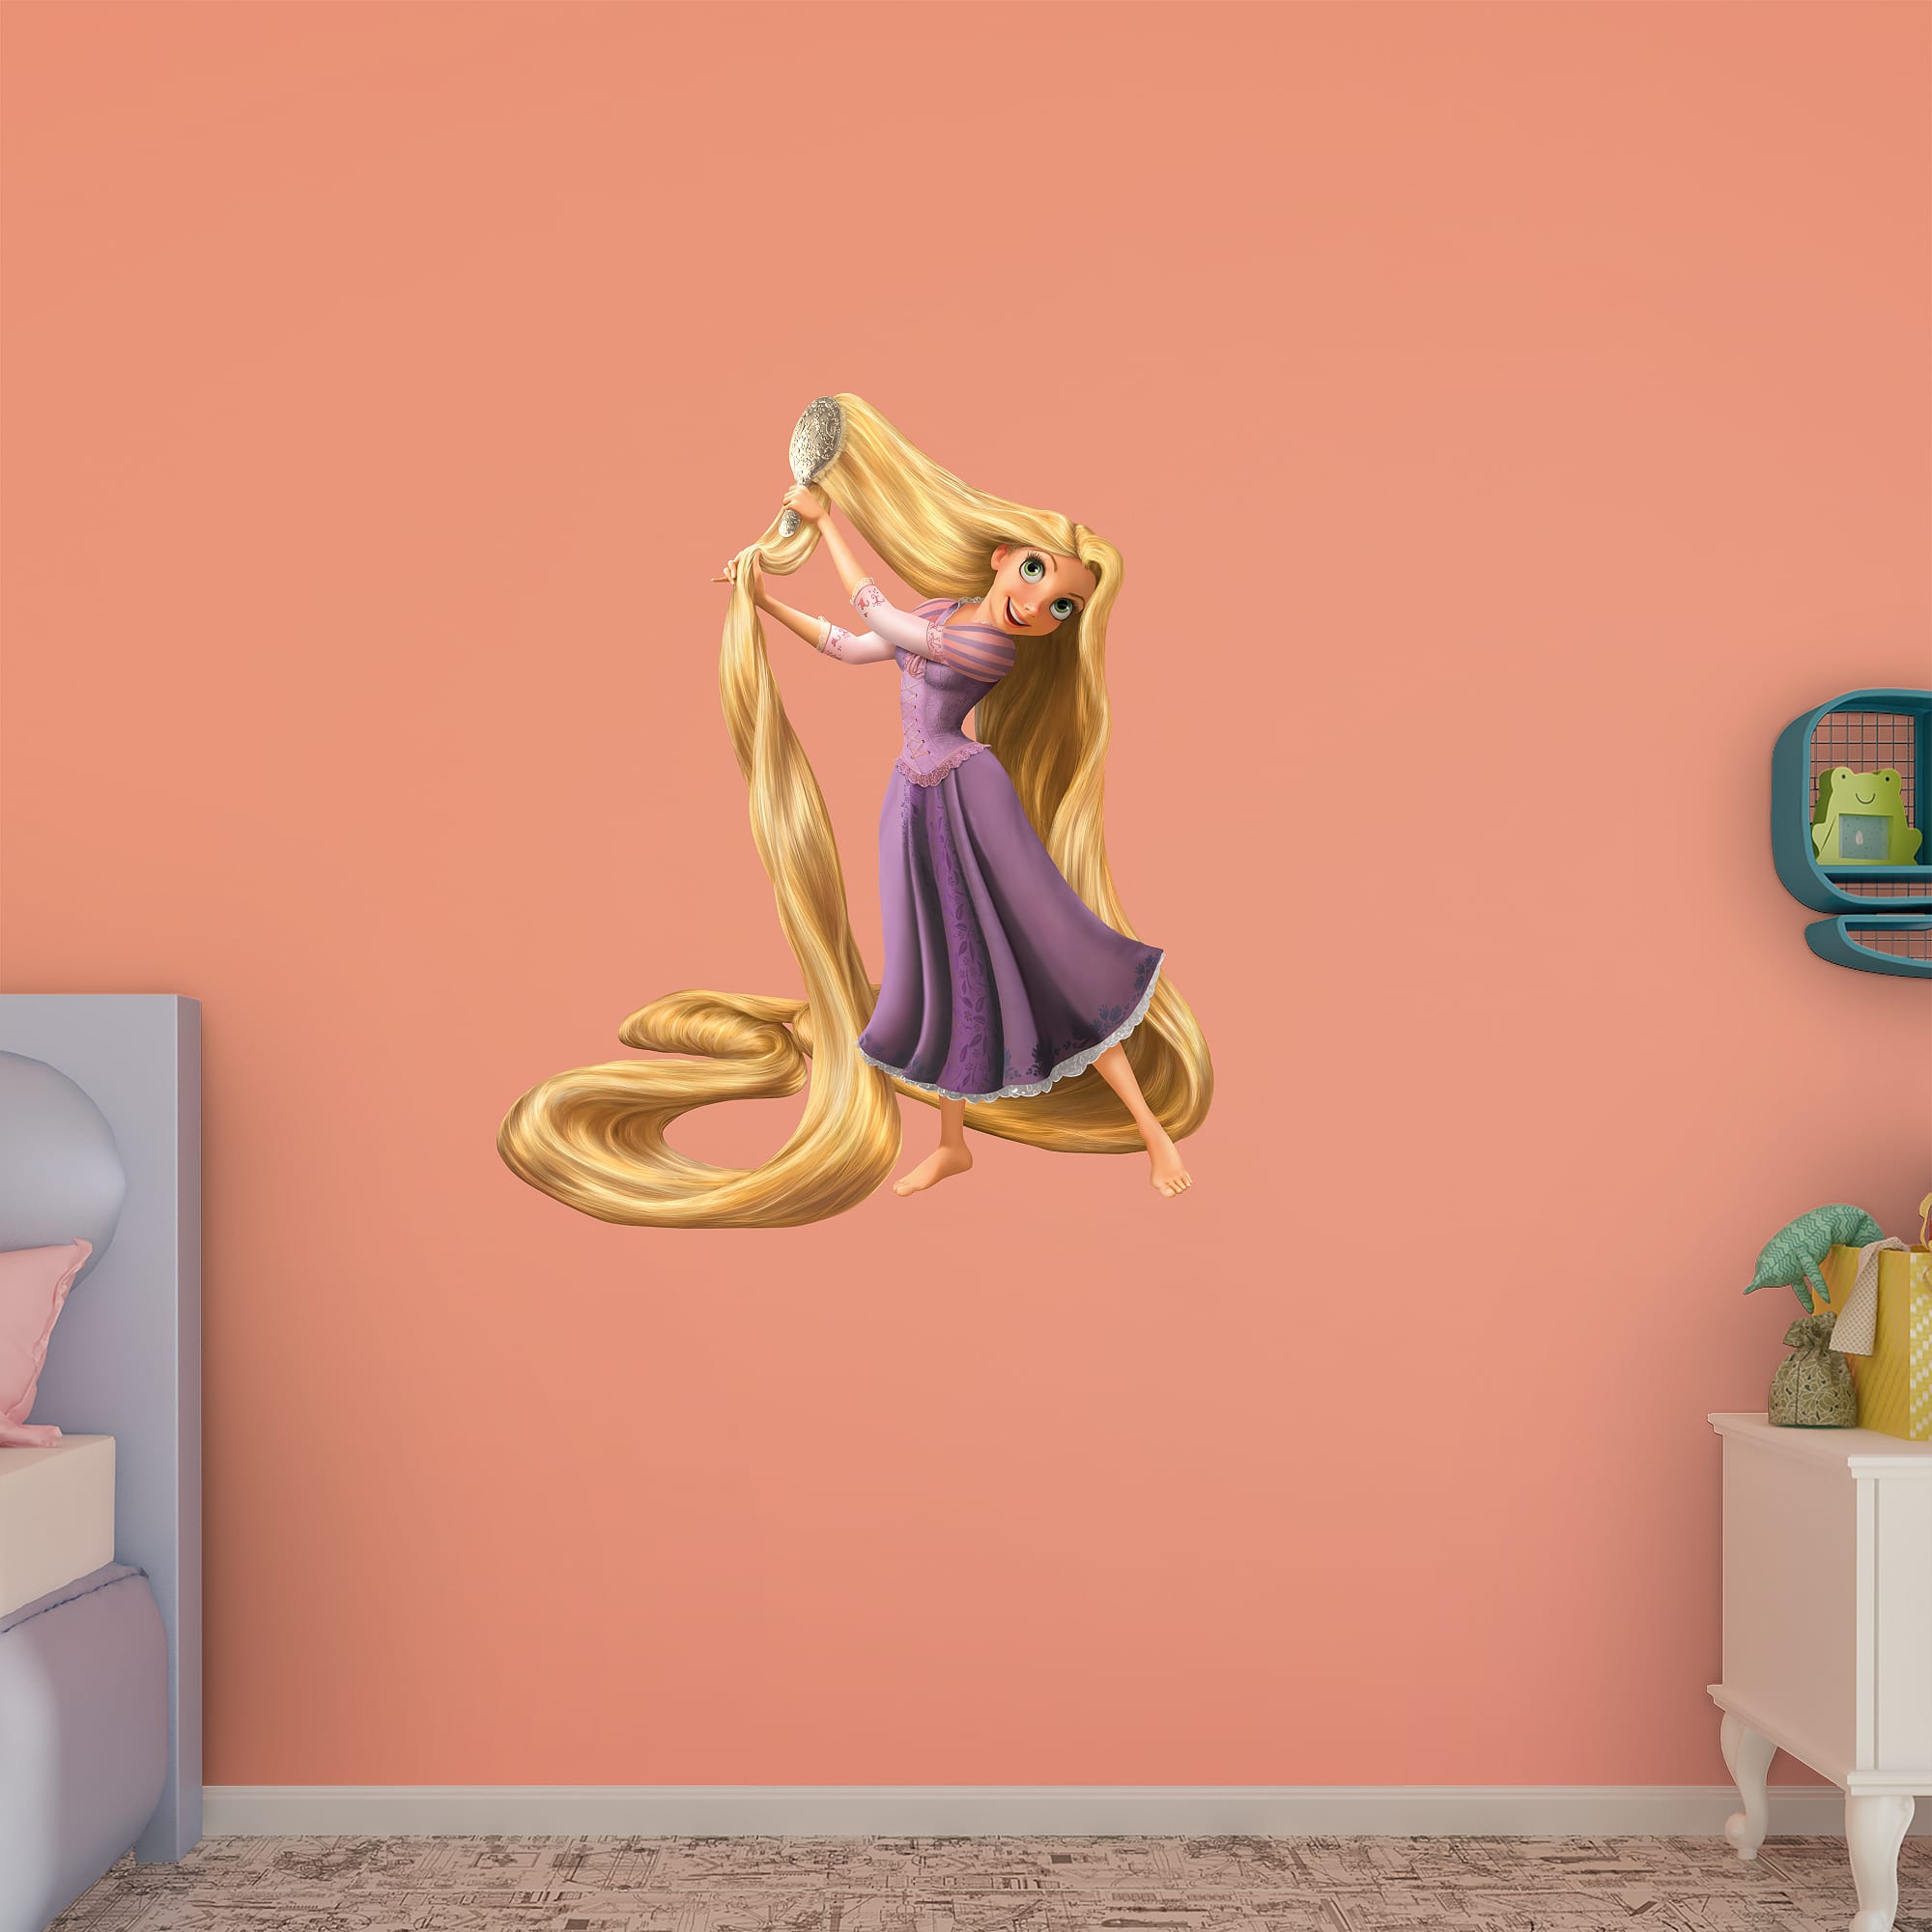 Rapunzel: Tangled - Officially Licensed Disney Removable Wall Decal 42.0"W x 49.0"H by Fathead | Vinyl